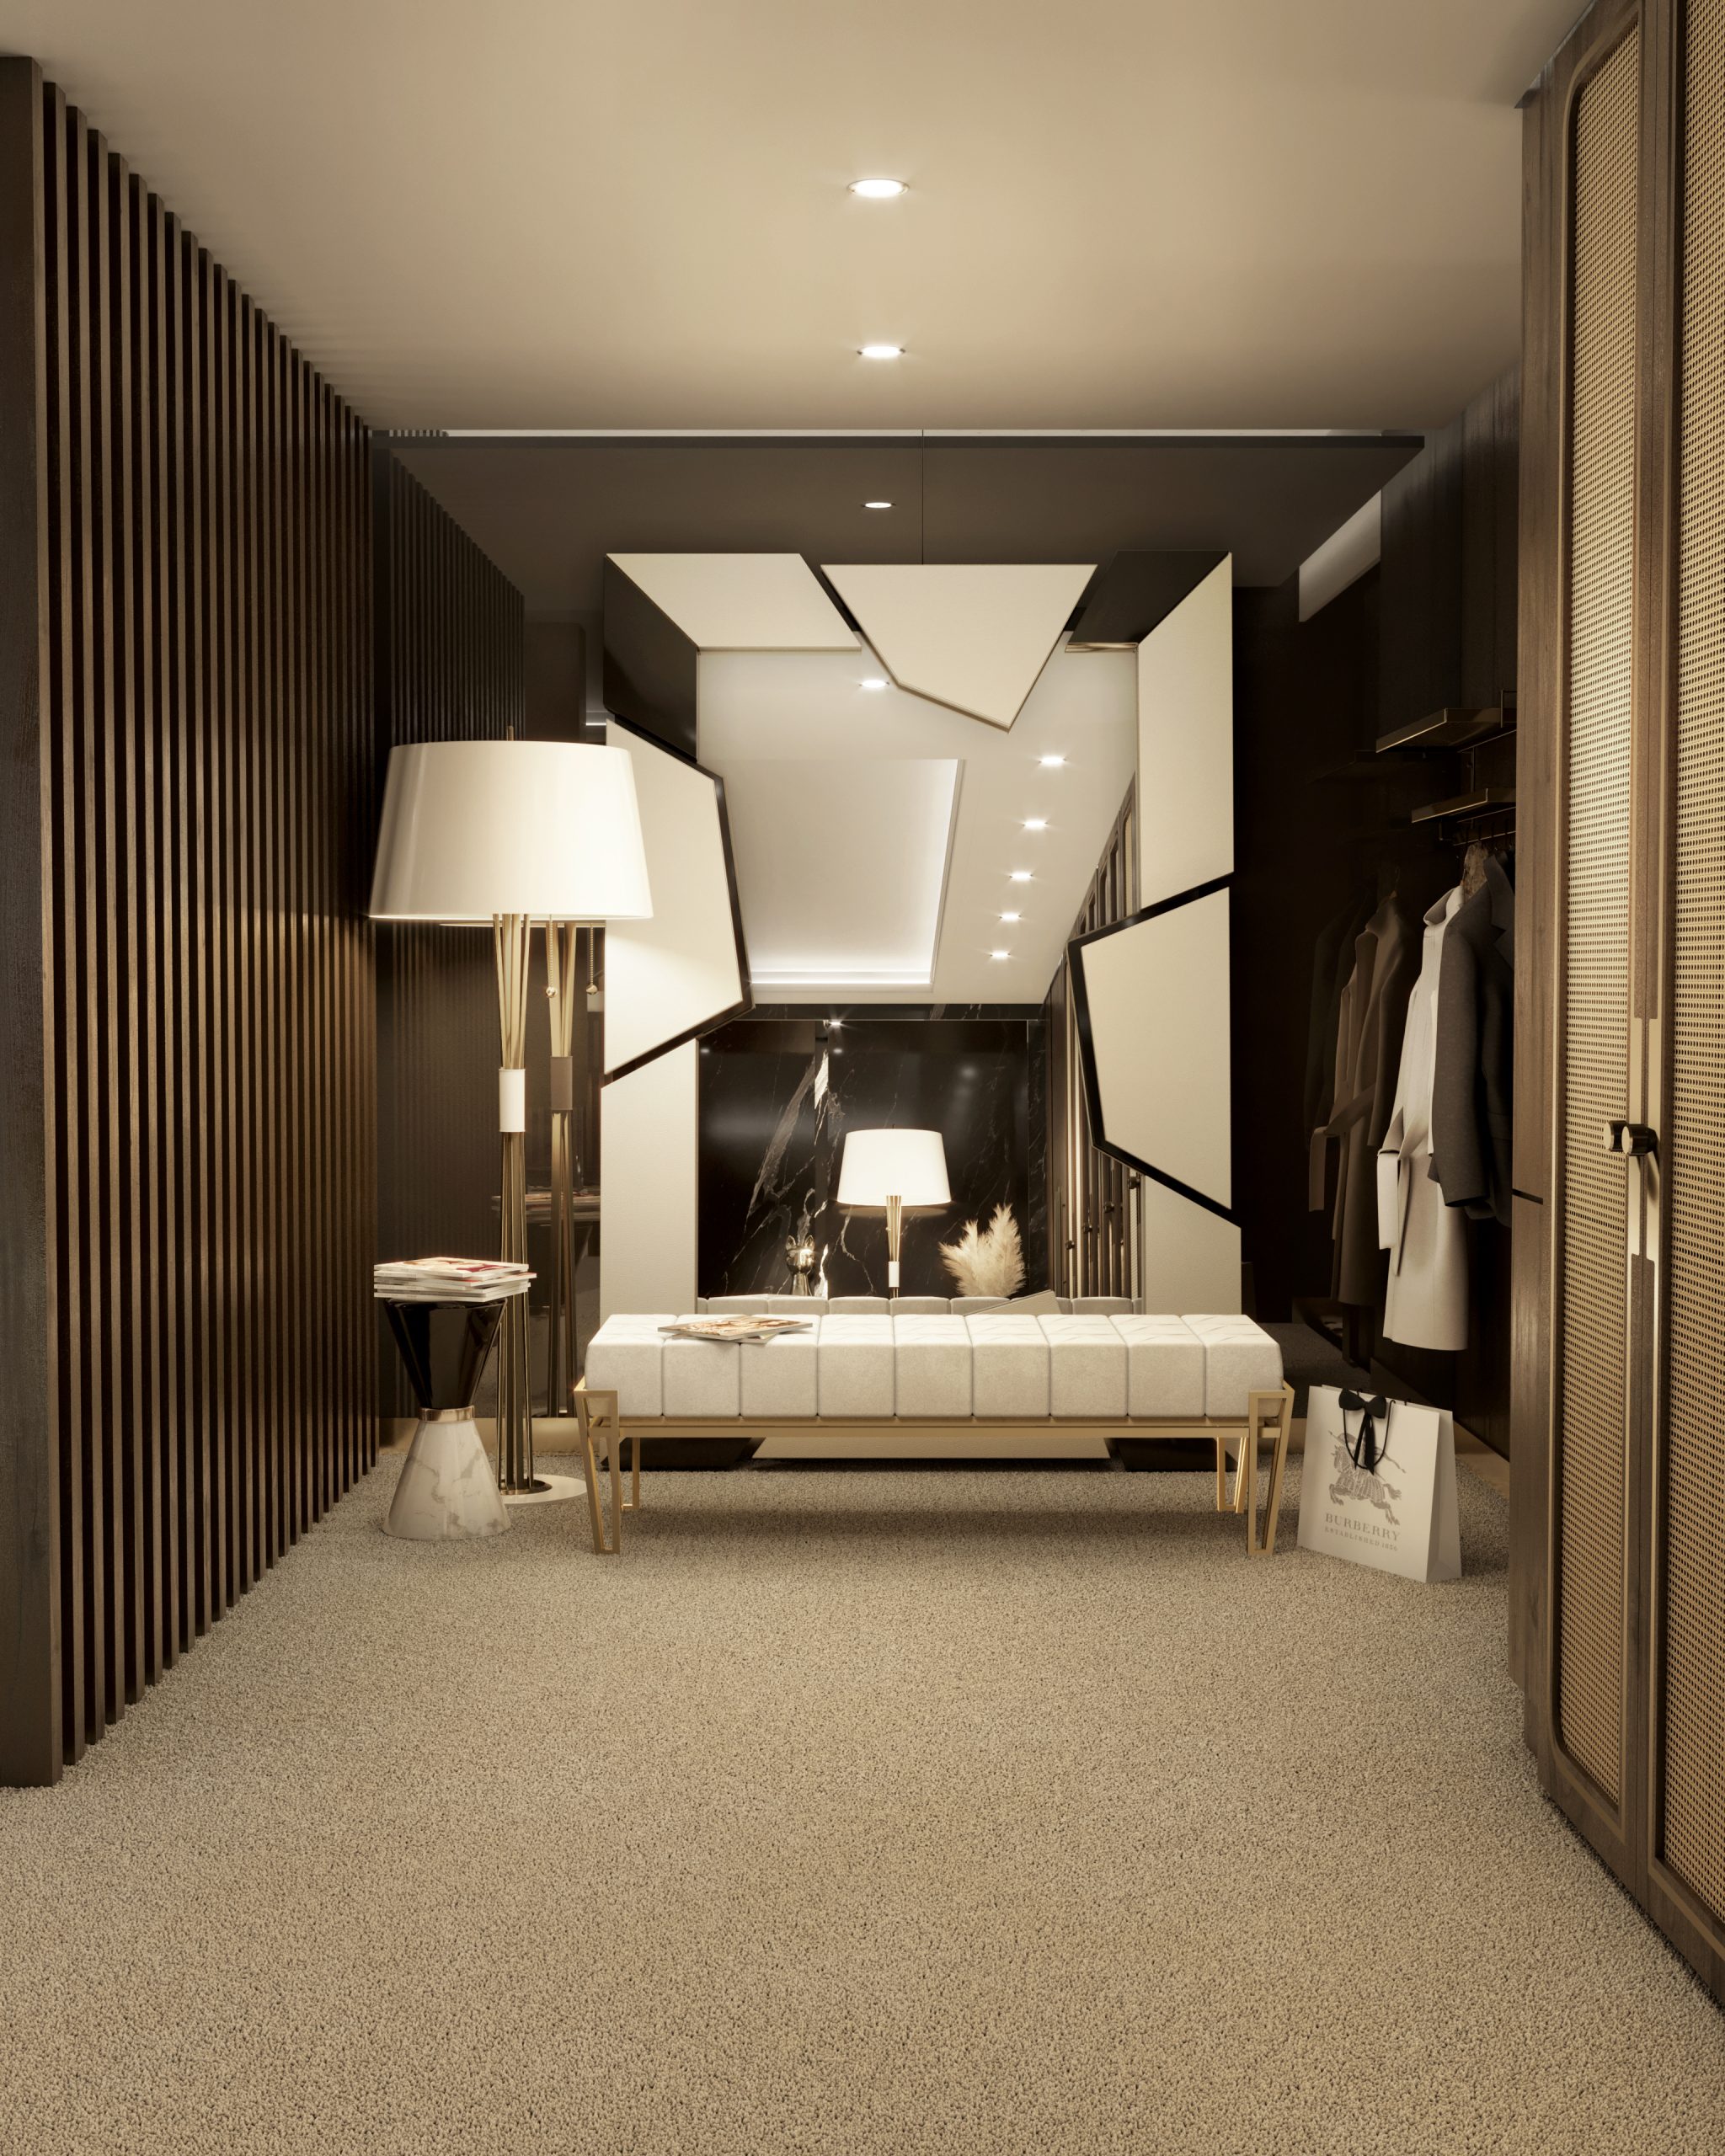 A CLOSET AREA WITH ESSENTIAL ELEMENTS